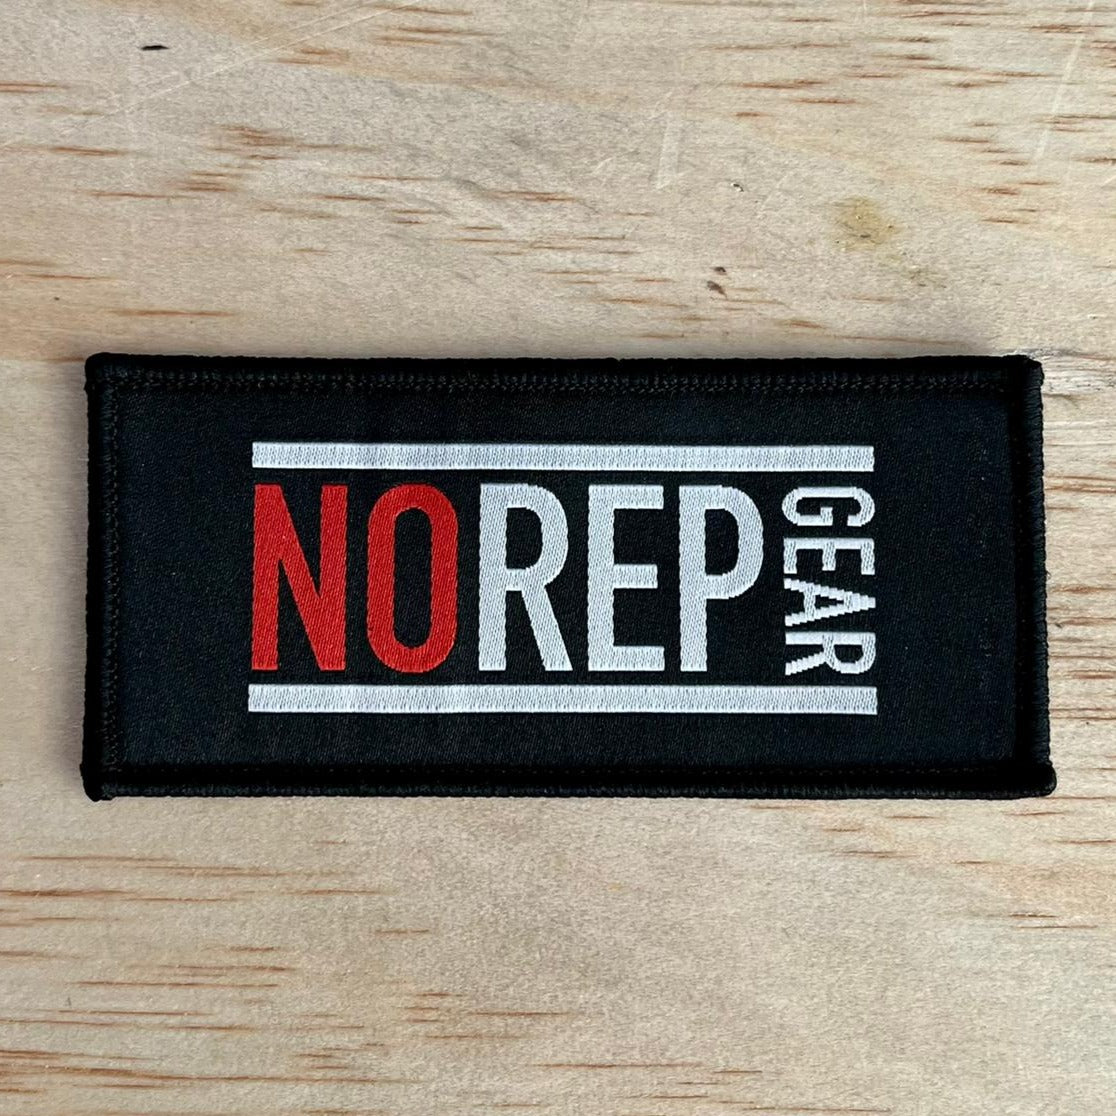 Crossfit patch, Crossfit velco patch, Sports backpack patch, No Rep Gear patch, NRG patch